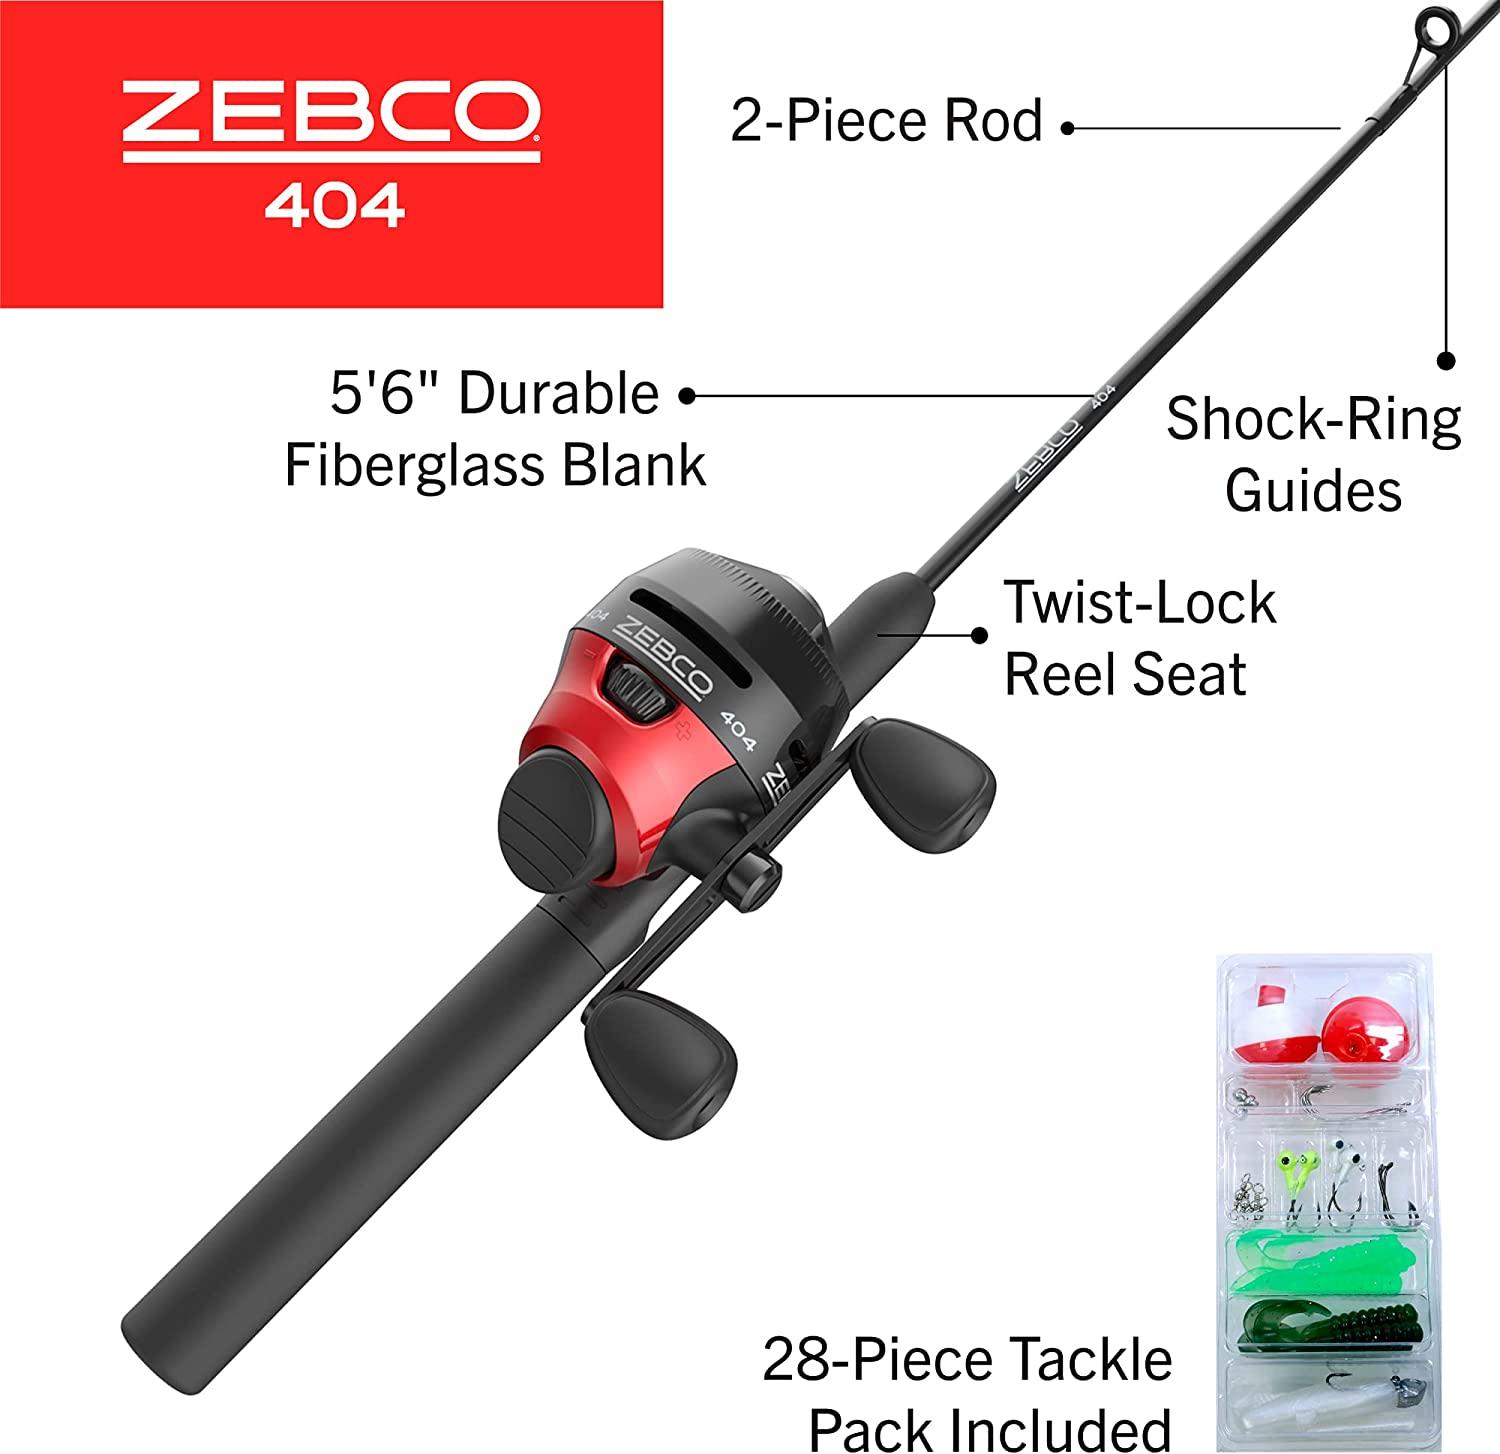 Zebco 404 Spincast Reel and 2-Piece Fishing Rod Combo Durable